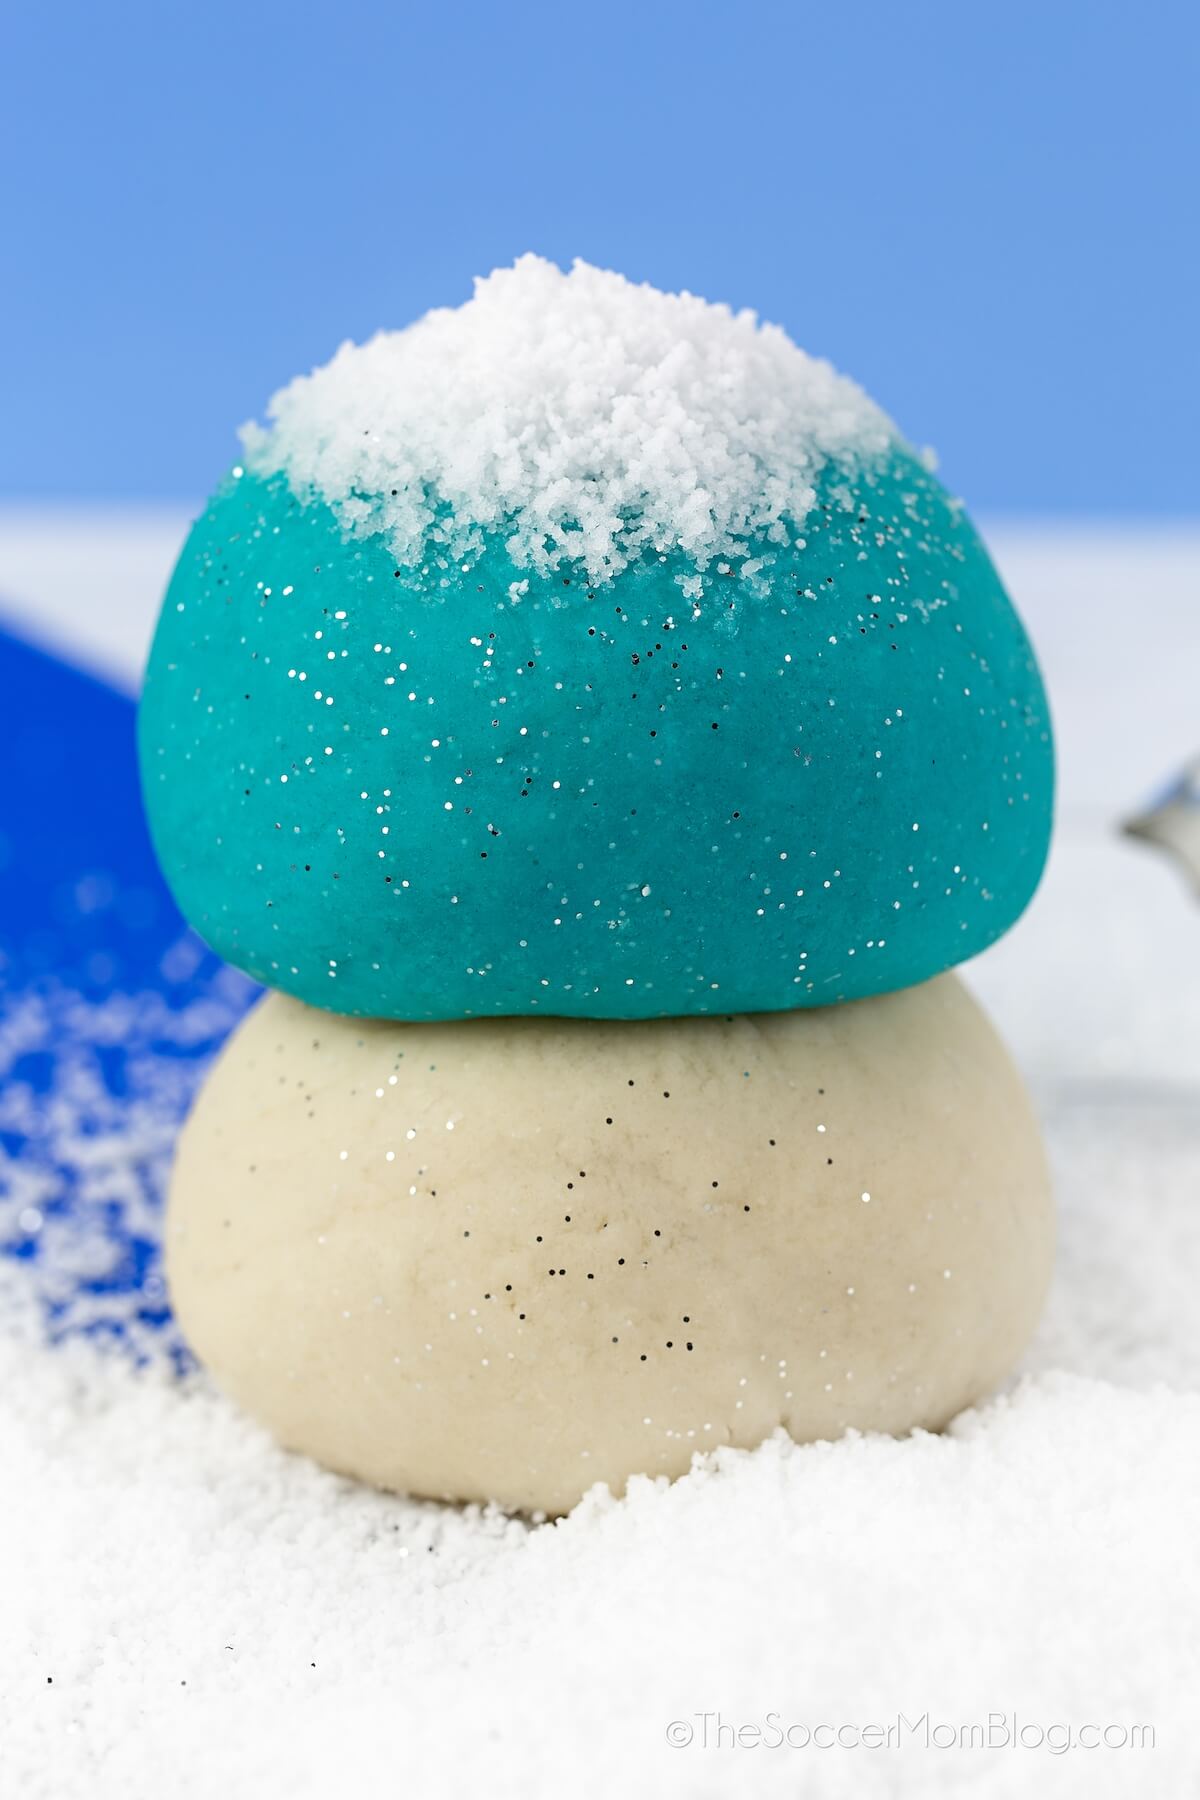 Stack of blue and white balls of playdough, surrounded by instant snow.